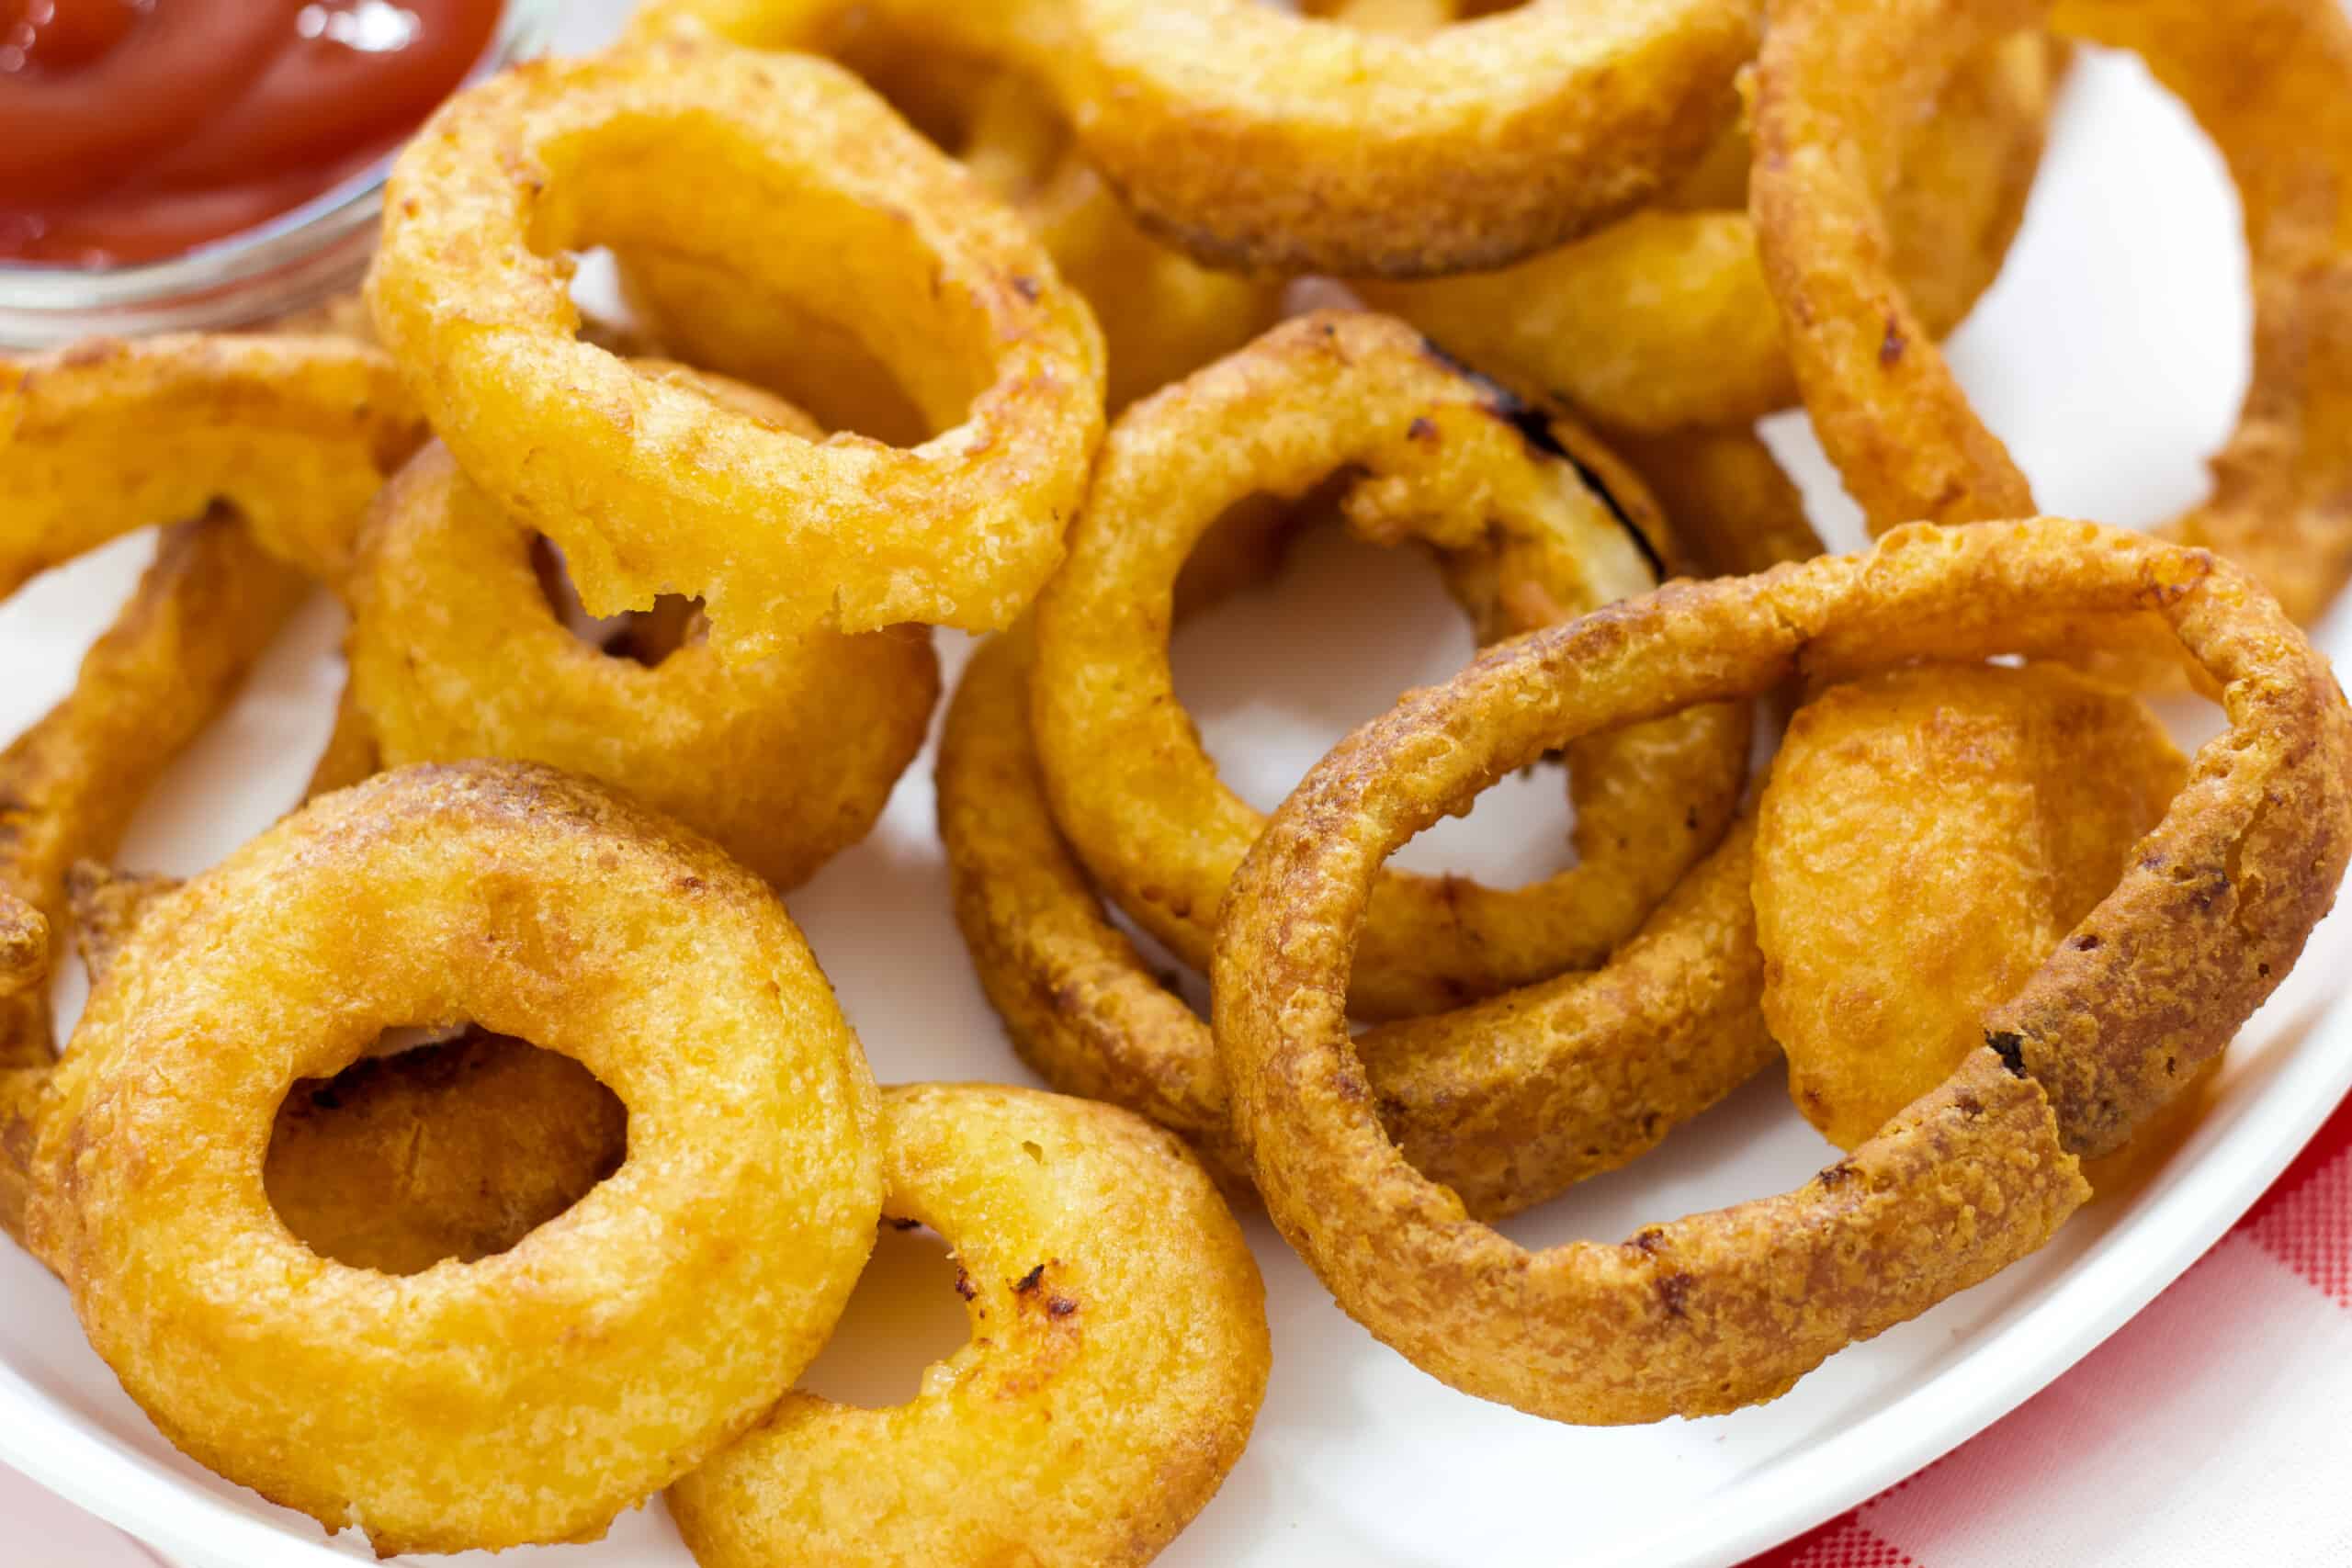 https://www.mindyscookingobsession.com/wp-content/uploads/2023/02/Frozen-Onion-Rings-in-the-Air-Fryer-6-scaled.jpg